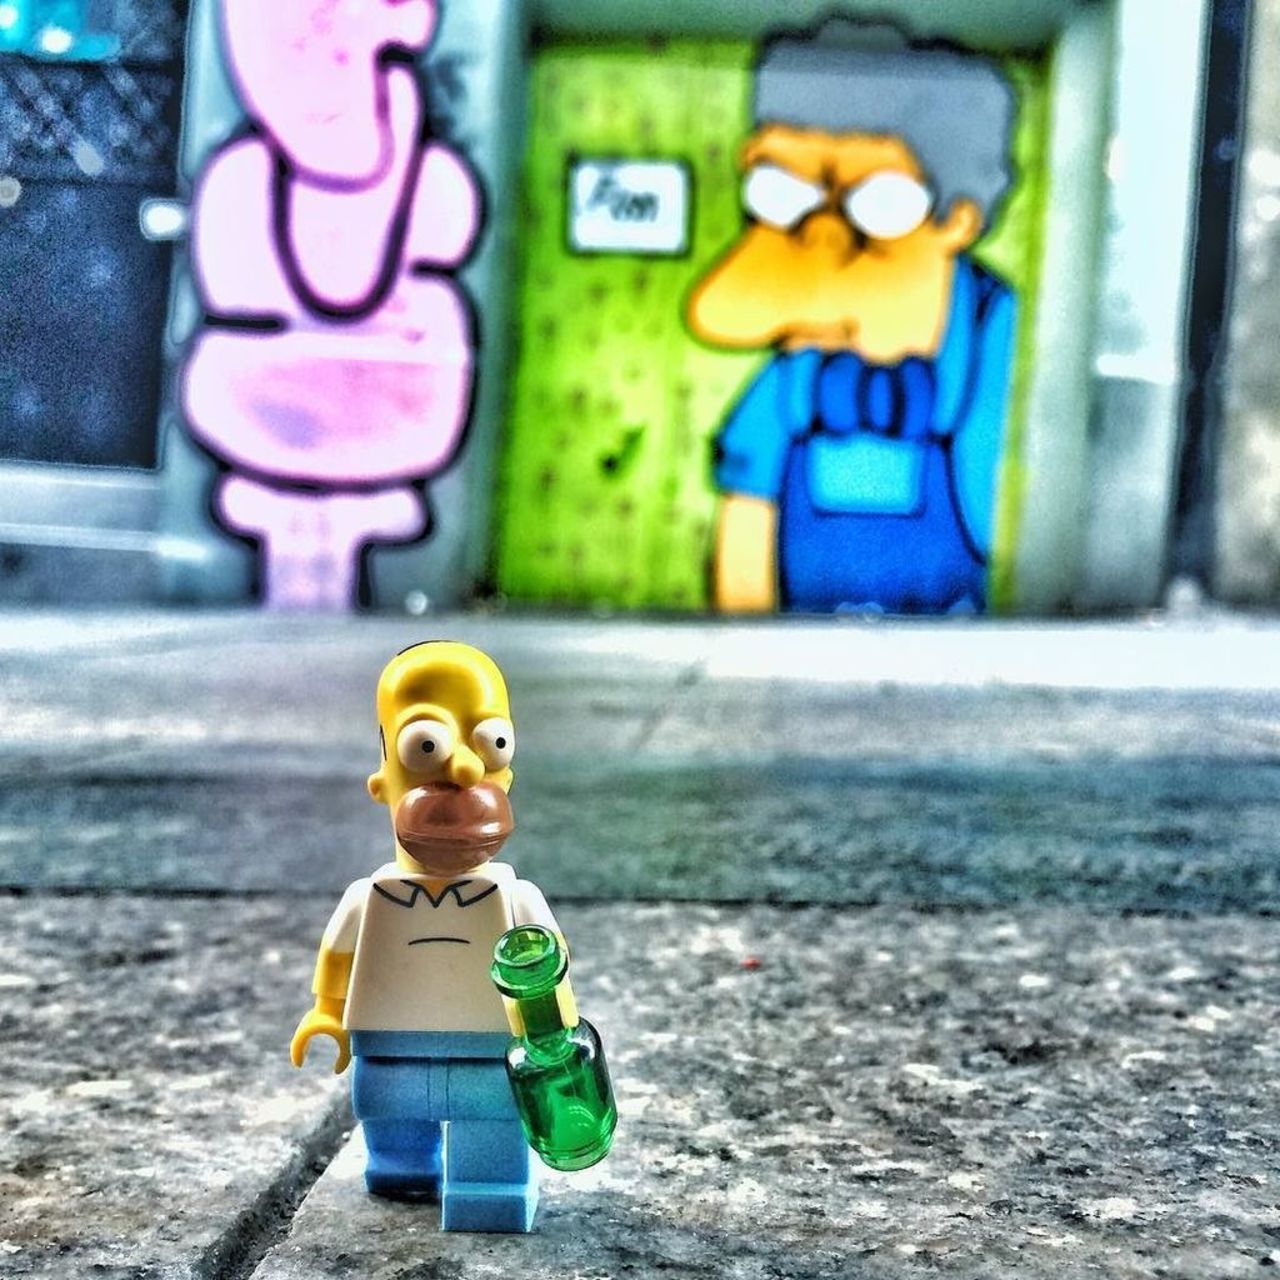 "I can't remember whether I paid for the beer"
--
#simpsons #homersimpson #graffiti #streetart #streetartistanbul #… https://t.co/YG92Qz2oZa